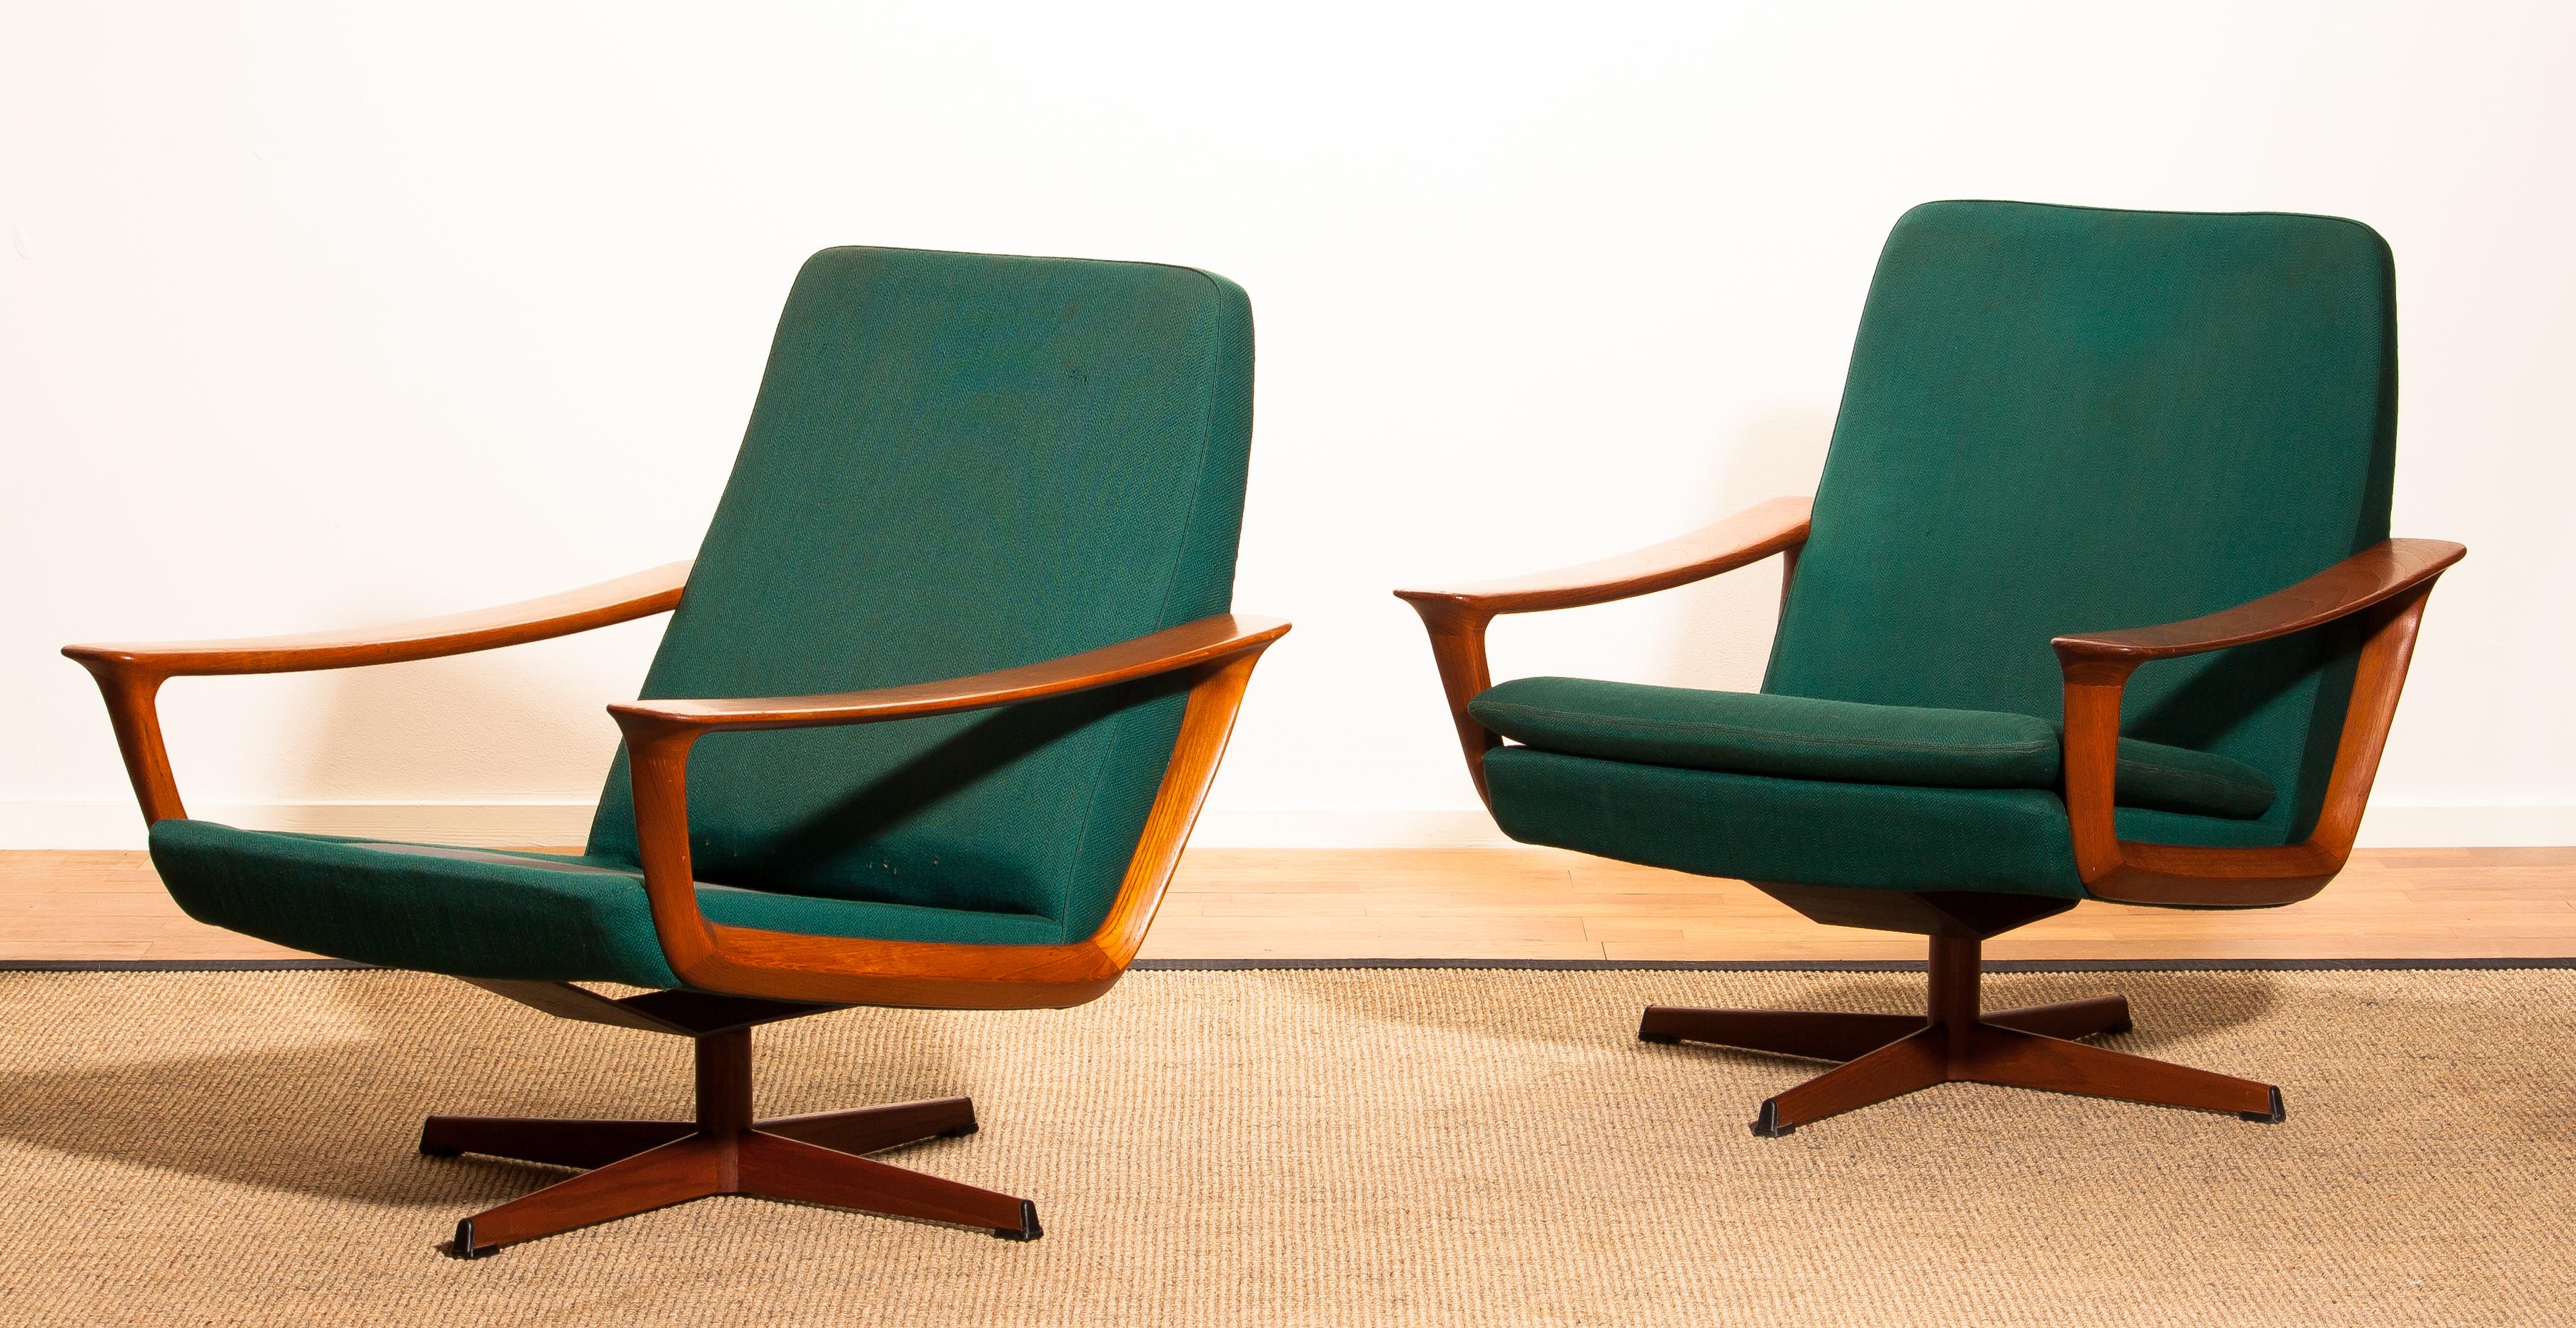 Extremely rare teak swivel chair by Johannes Andersen for Trensum, Denmark.
The chair to the right is in excellent condition.
Upholstery and padding shows wear consistent with age and use.
The chair to the left is also in perfect condition except